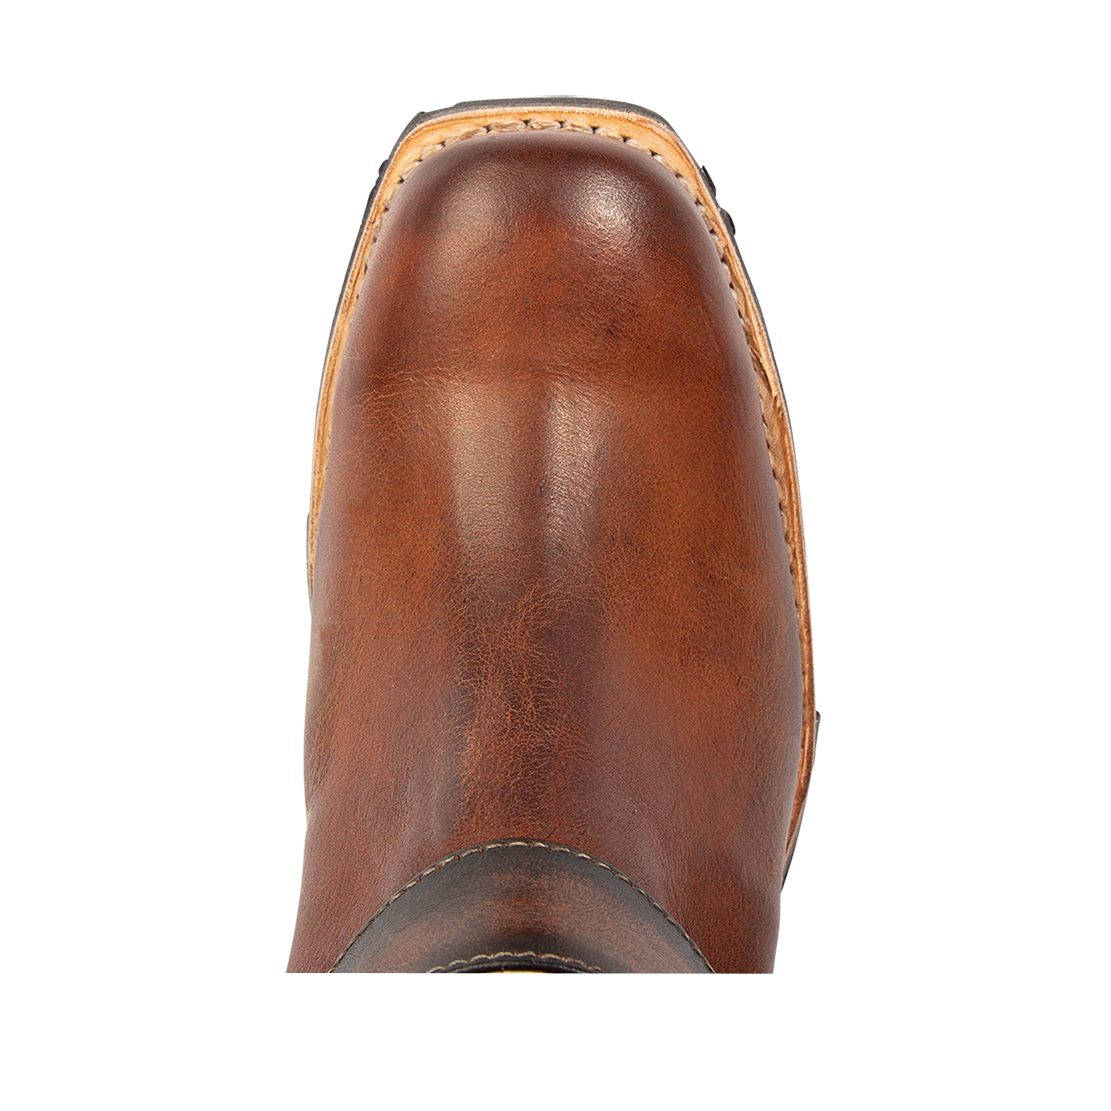 Top view showing square toe on FREEBIRD women's Wagner cognac tall moto boot